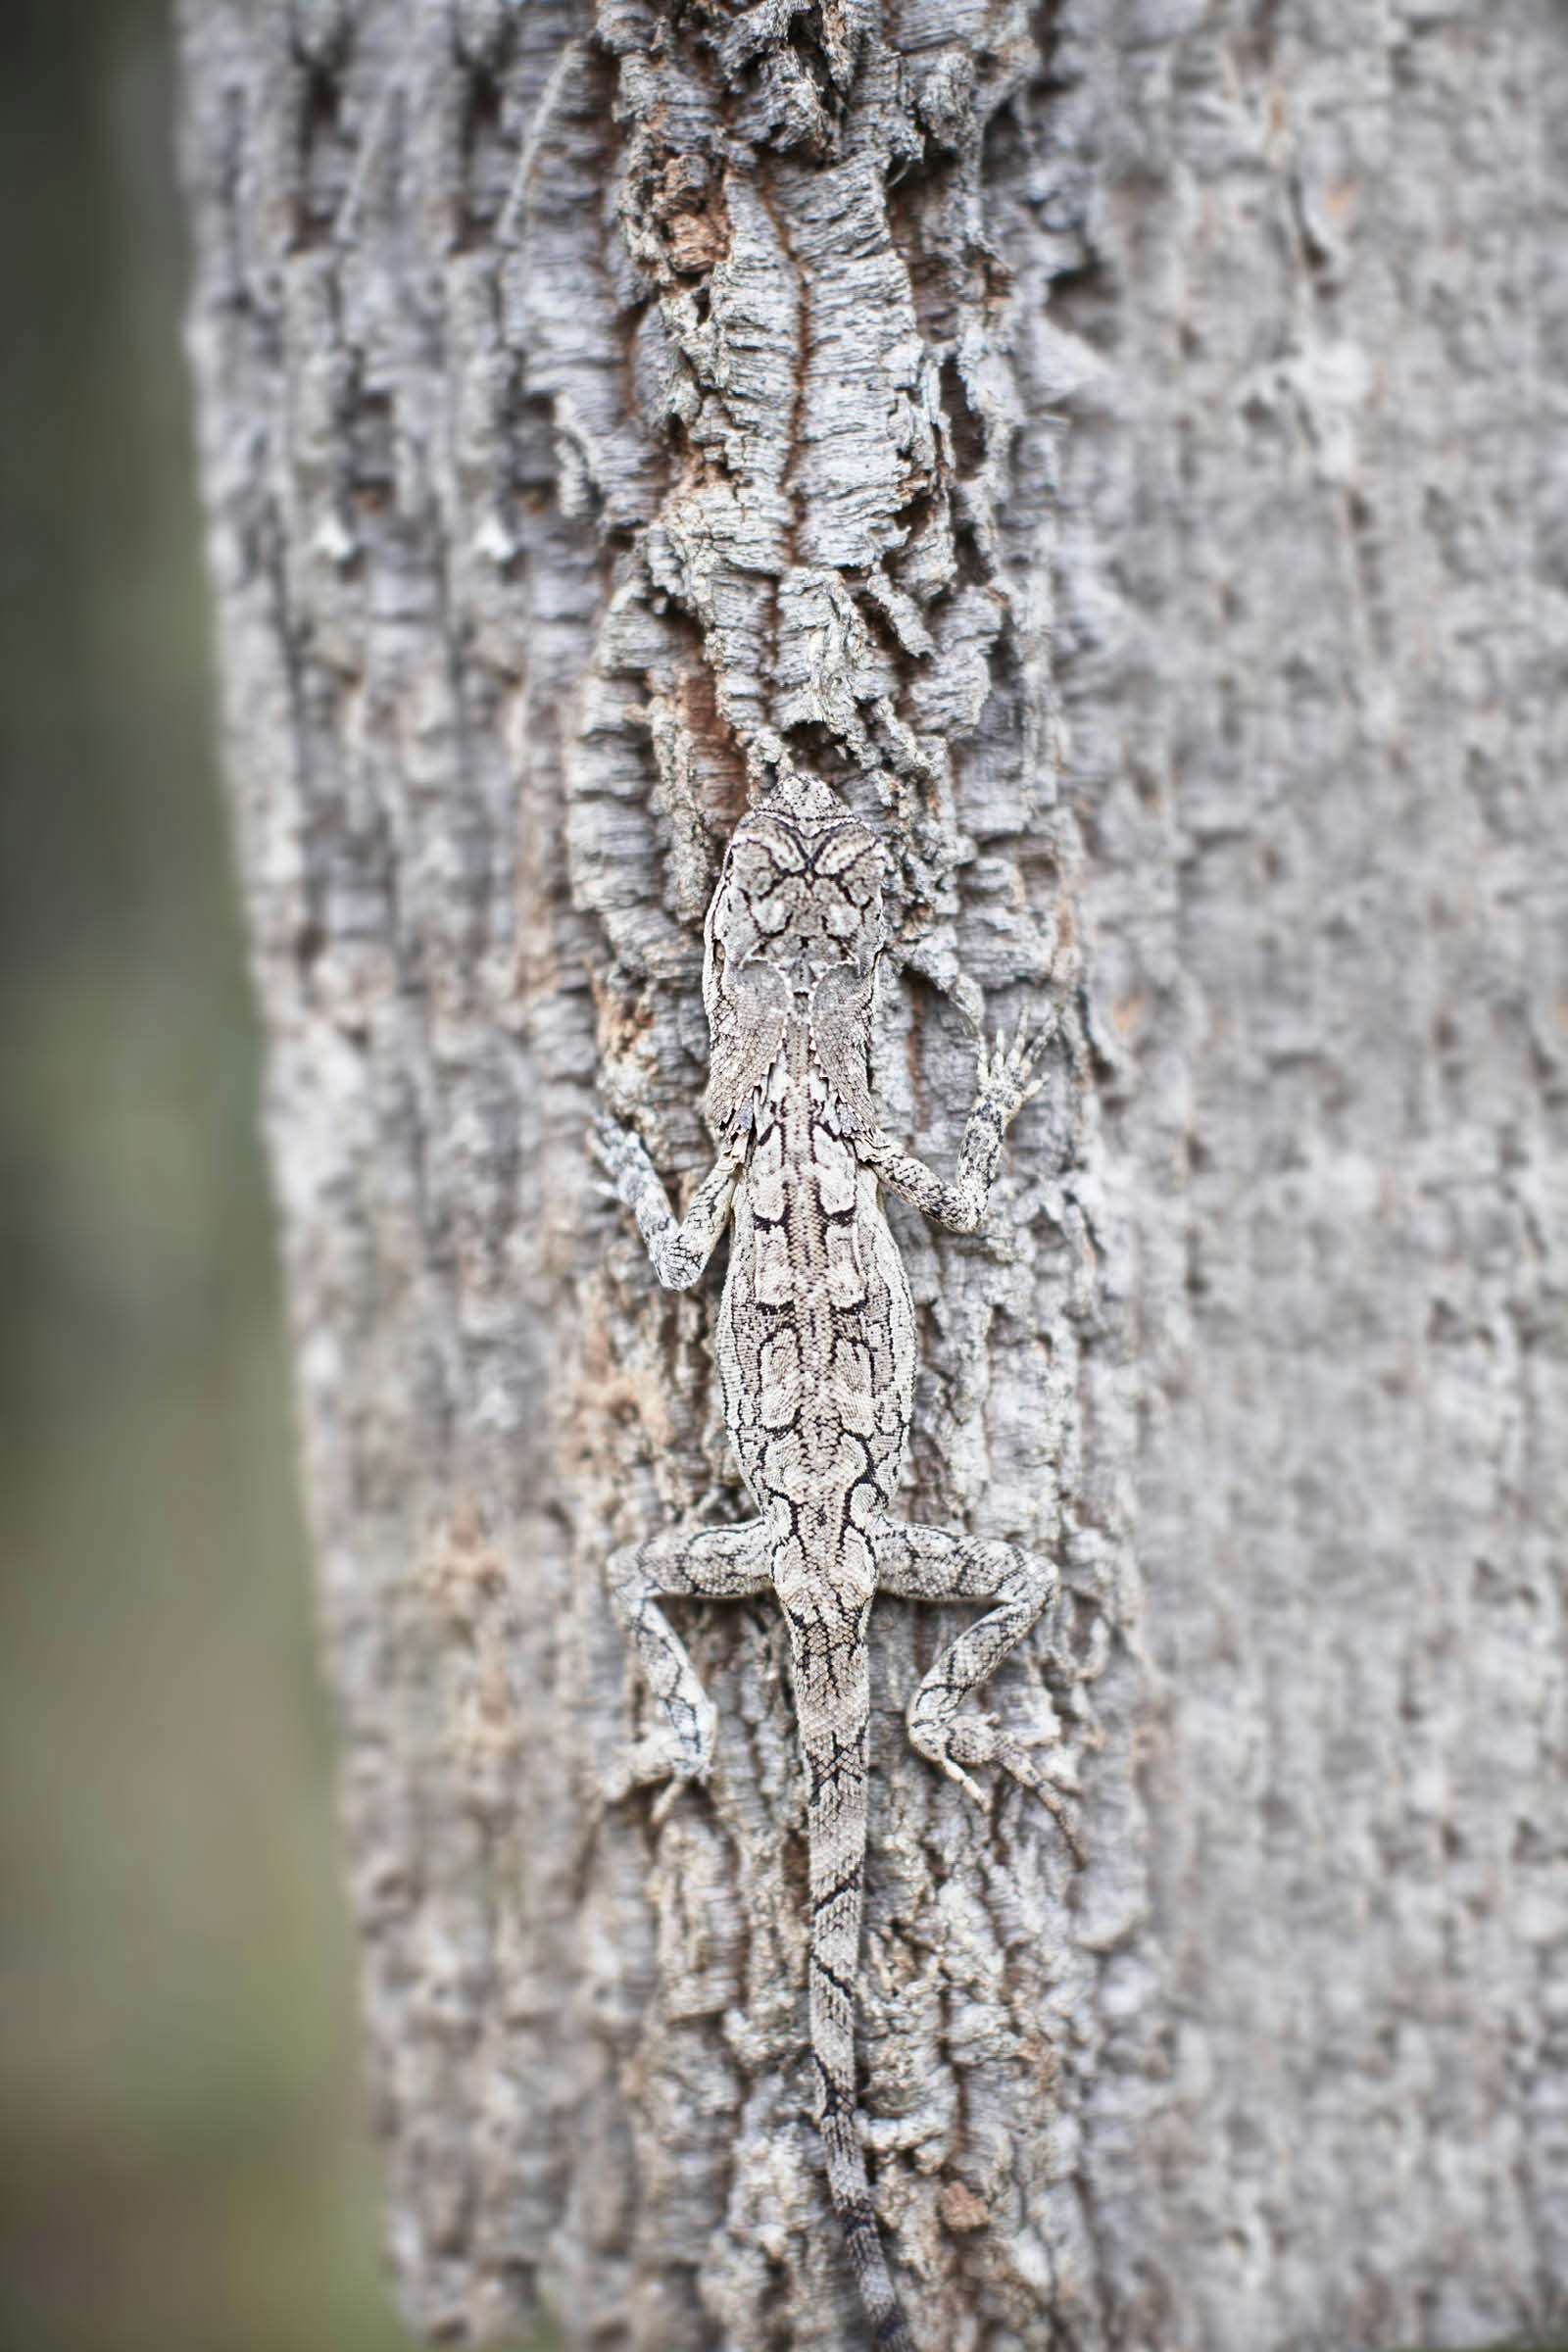 A frilled dragon lizard camouflaged against a tree's grey bark